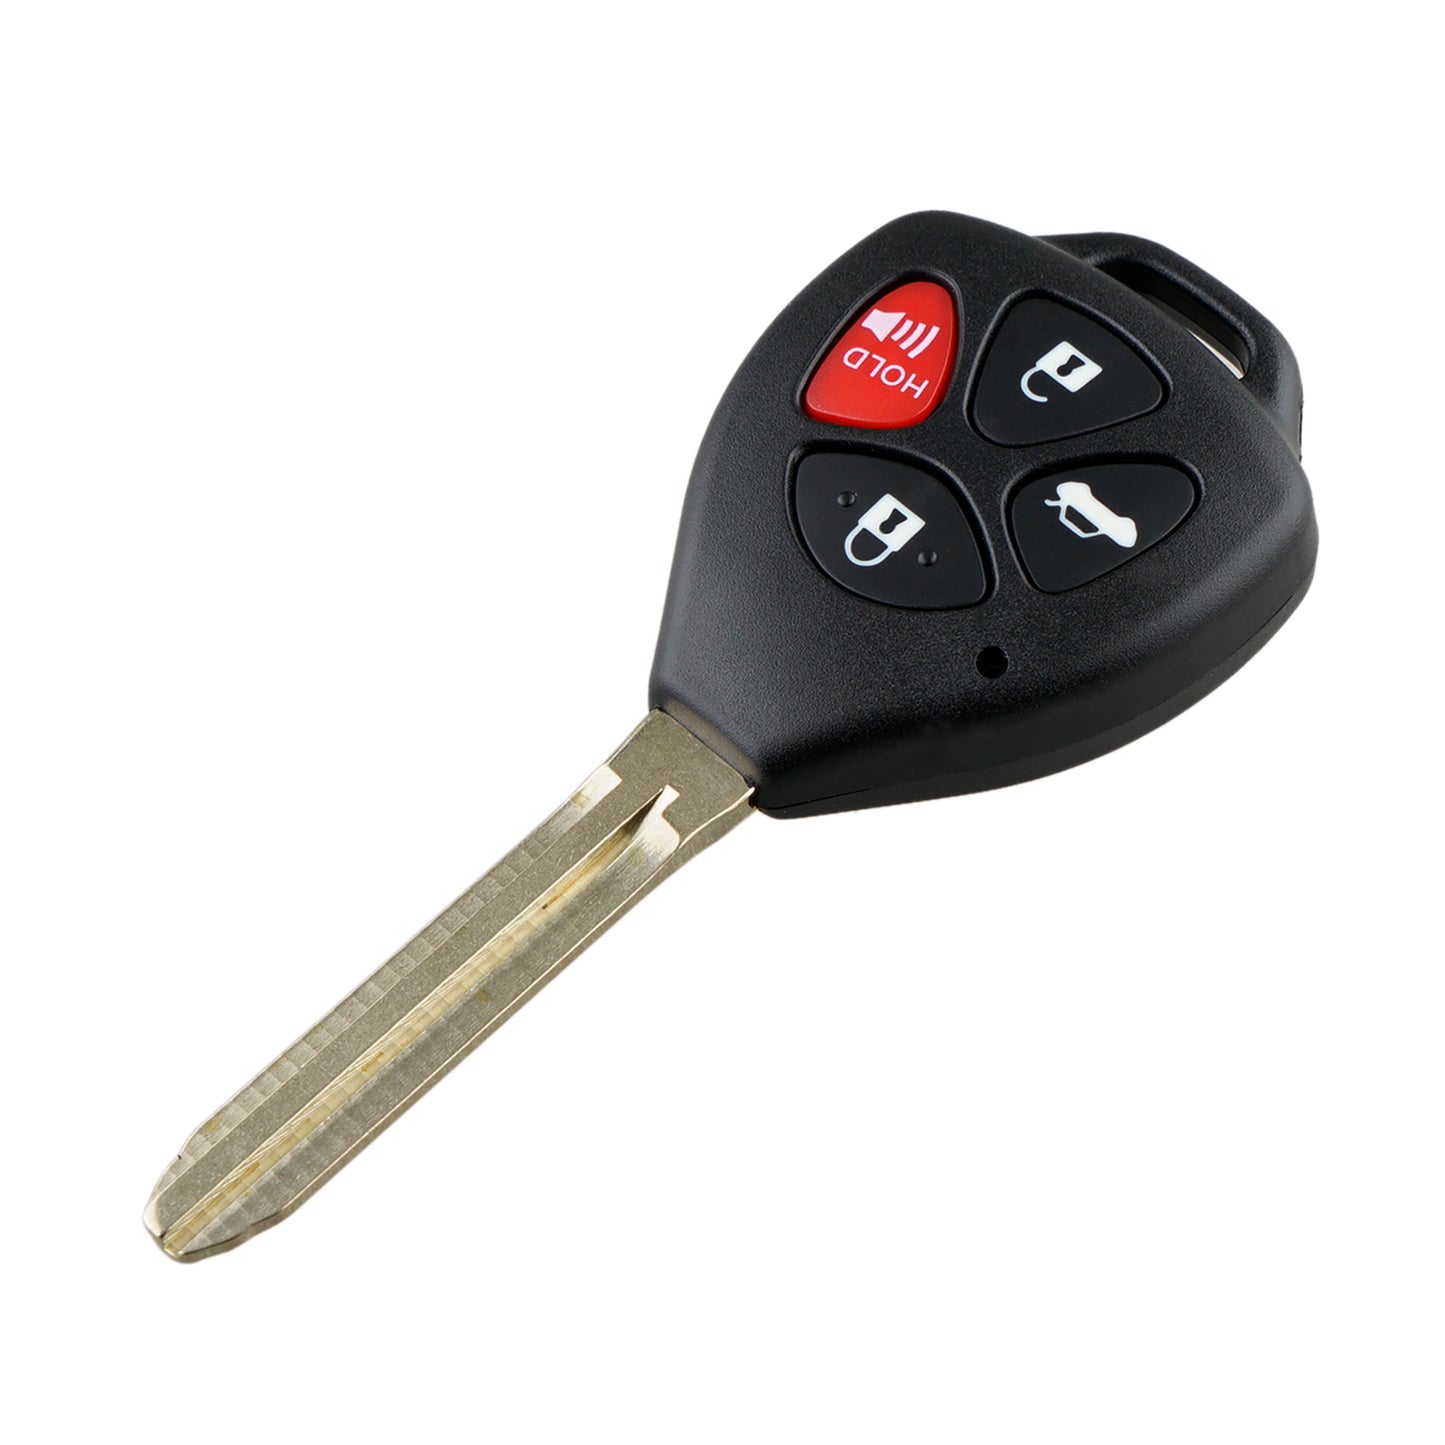 4 Buttons 314MHz Keyless Entry Fob Remote Car Key For 2008-2012 Toyota Avalon (without Prox or G)  Corolla (without G on blade) and (VIN # beginning with 1 or 2) FCC ID:  GQ4-29T SKU : J248